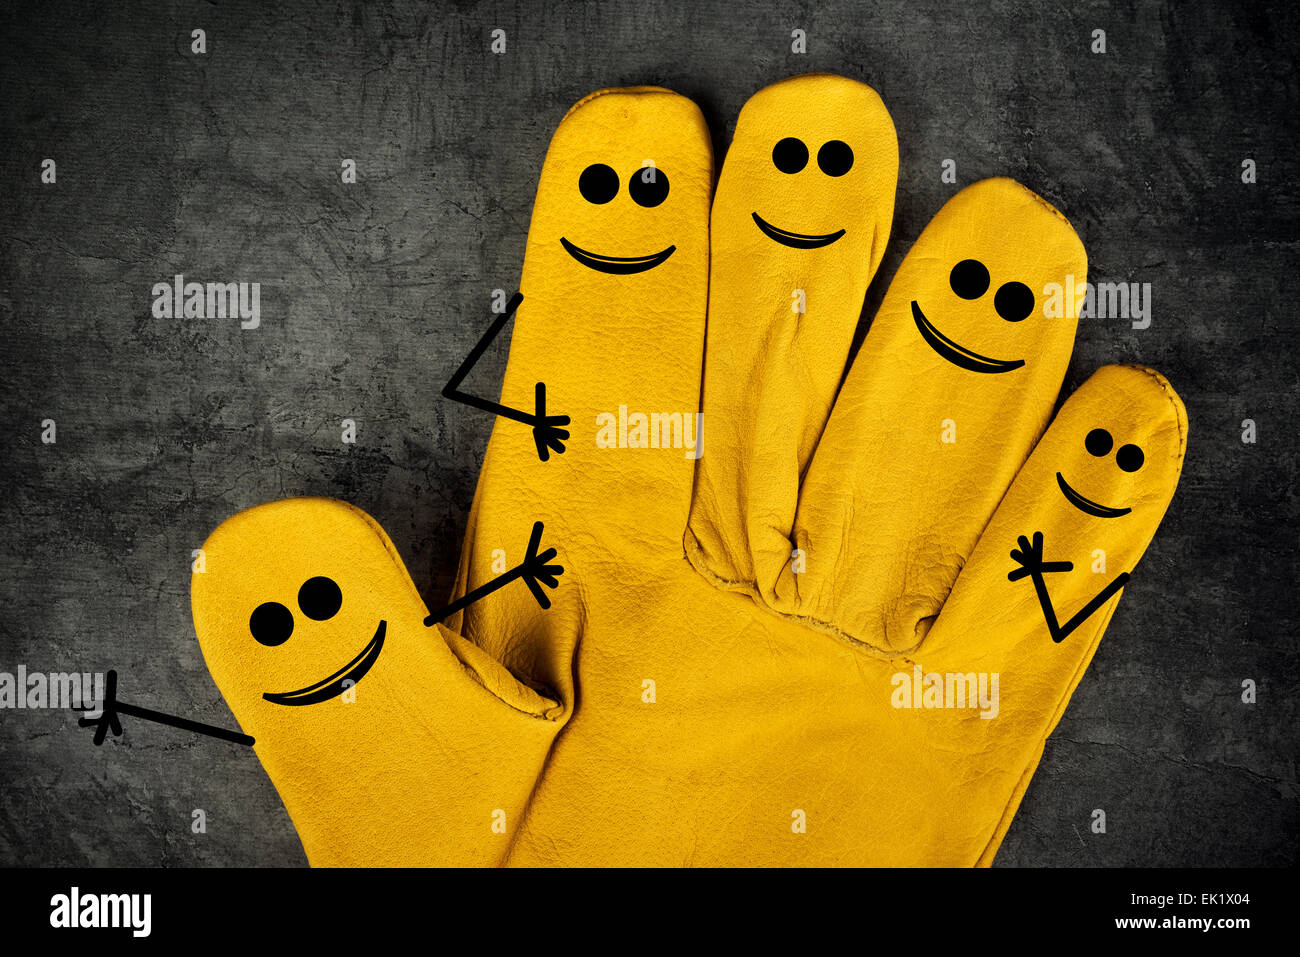 Five Happy Laughing Smileys on Fingers of Yellow Leather Protective Construction Industry Working Gloves Stock Photo